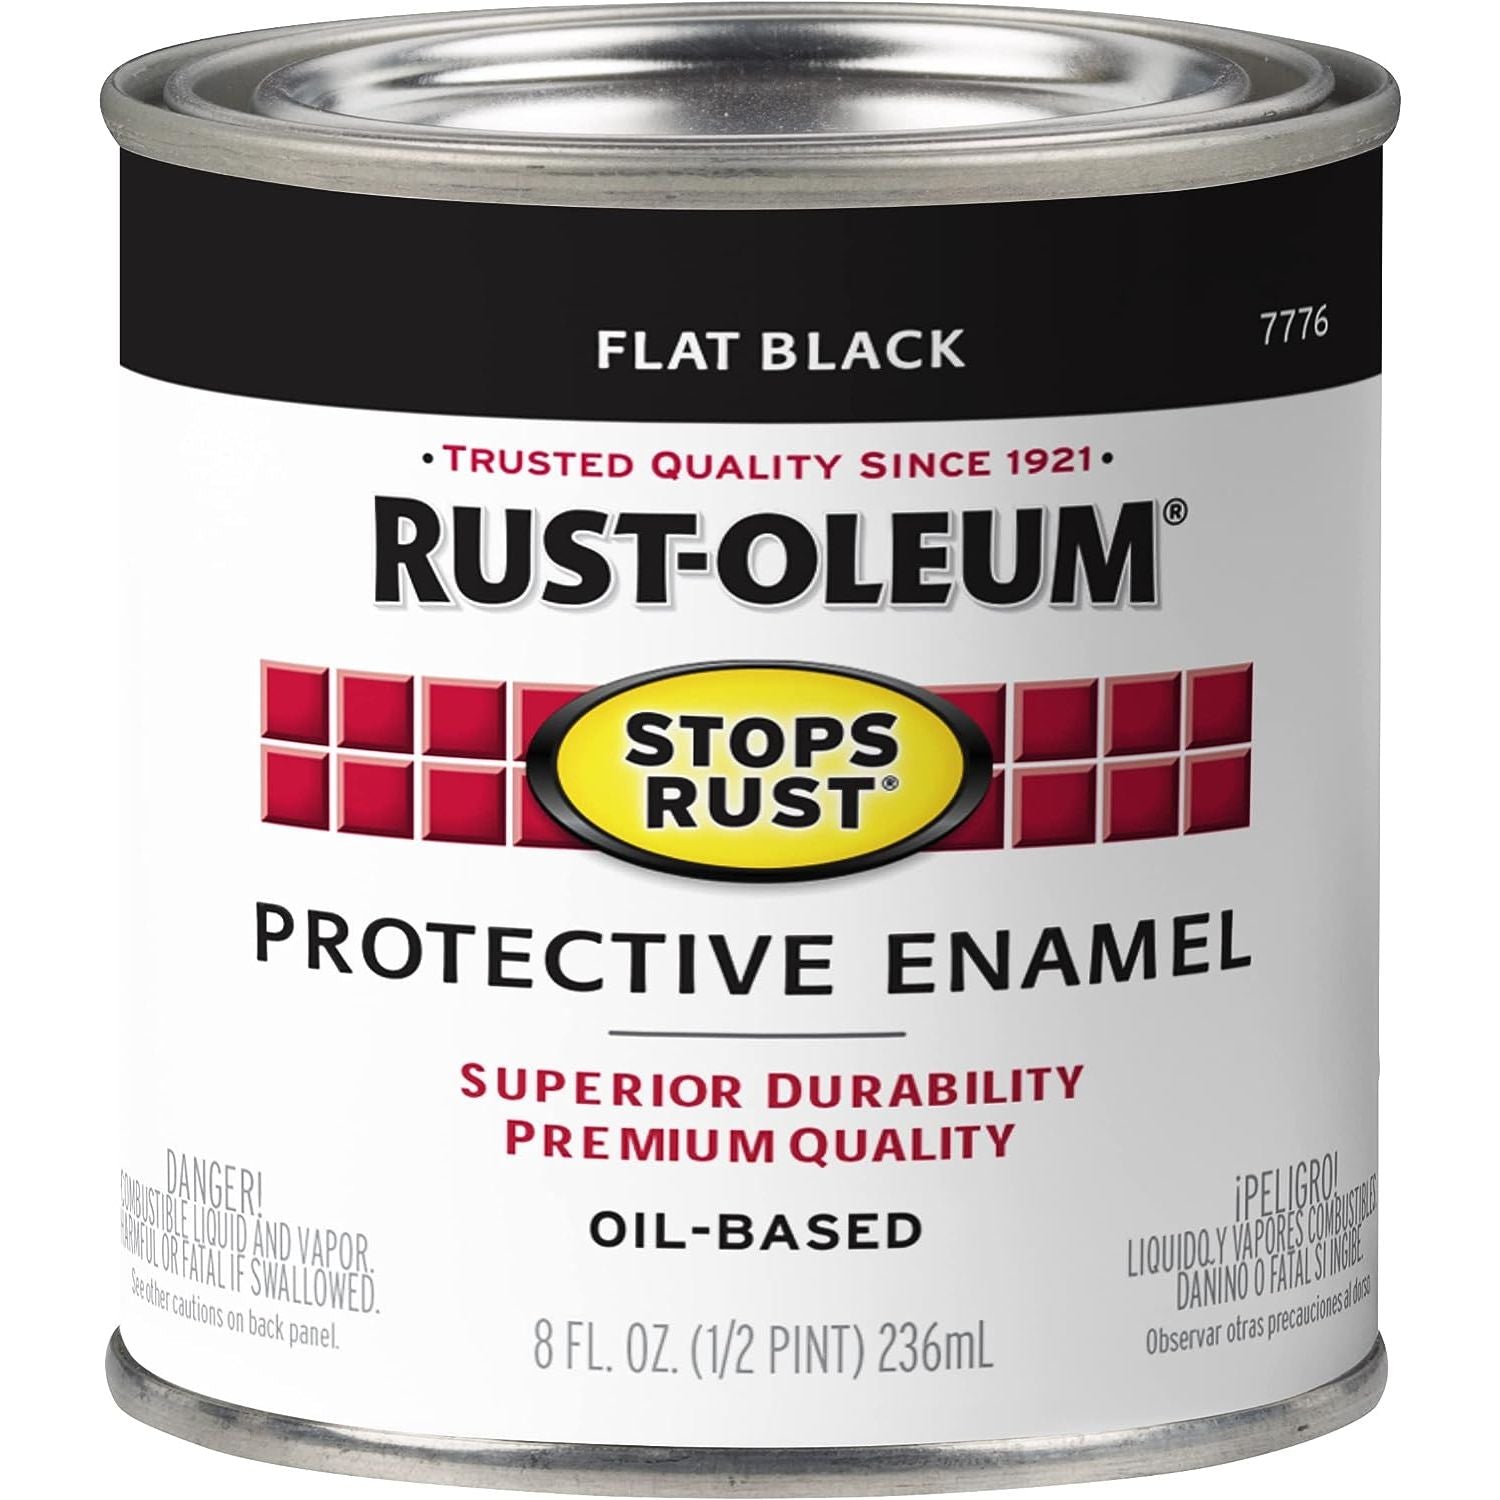 Rust-Oleum 7776730 Stops Rust Protective Enamel 236ml | FLAT BLACK (6 Cans) - South East Clearance Centre